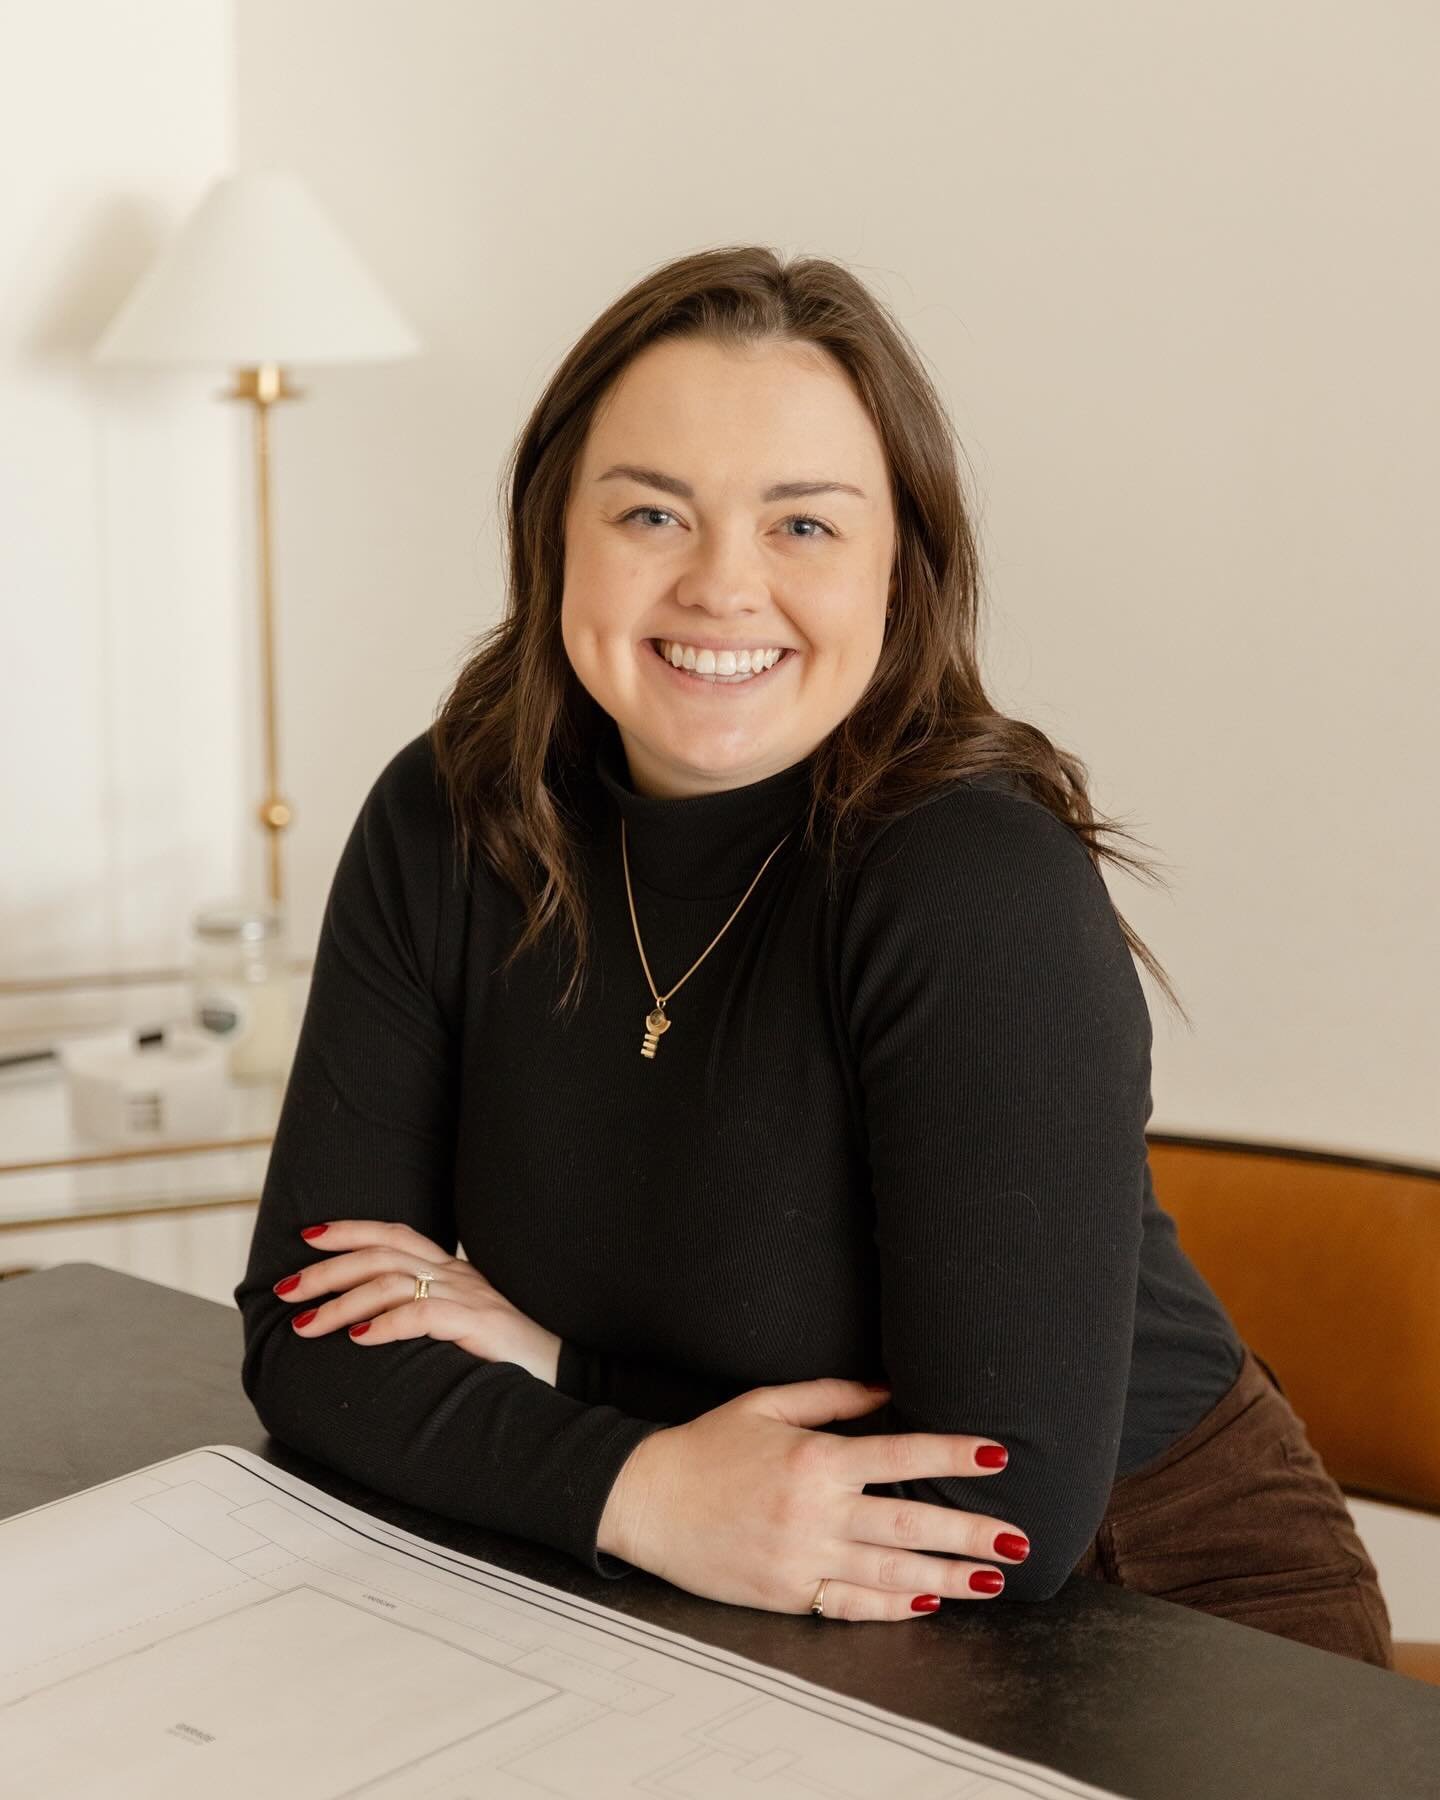 Meet Hannah! Hannah manages all aspects of the design process and operations, serving as the primary contact for our clients during our design phase to ensure LWID&rsquo;s detailed design approach is successfully executed from start to finish.

Celeb